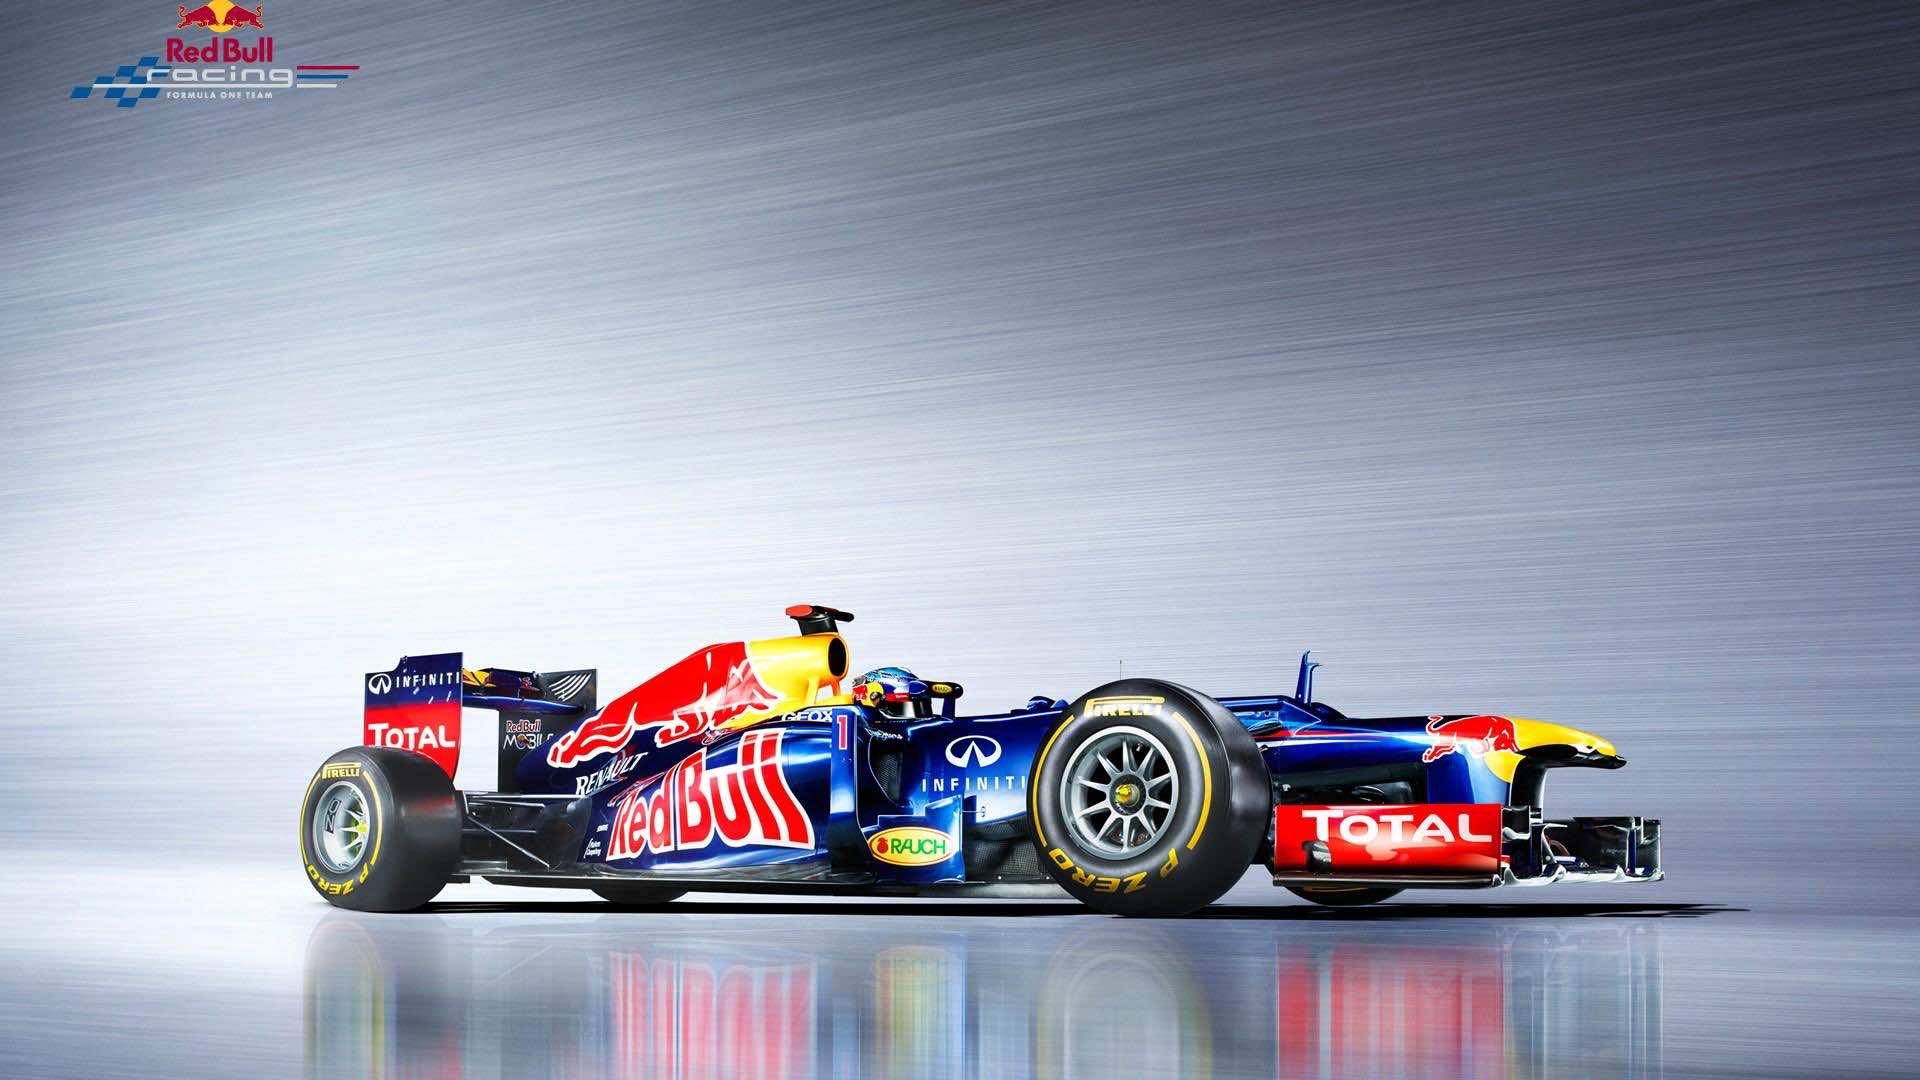 Over 50 Formula One Cars F1 Wallpapers in HD For Free Downlo